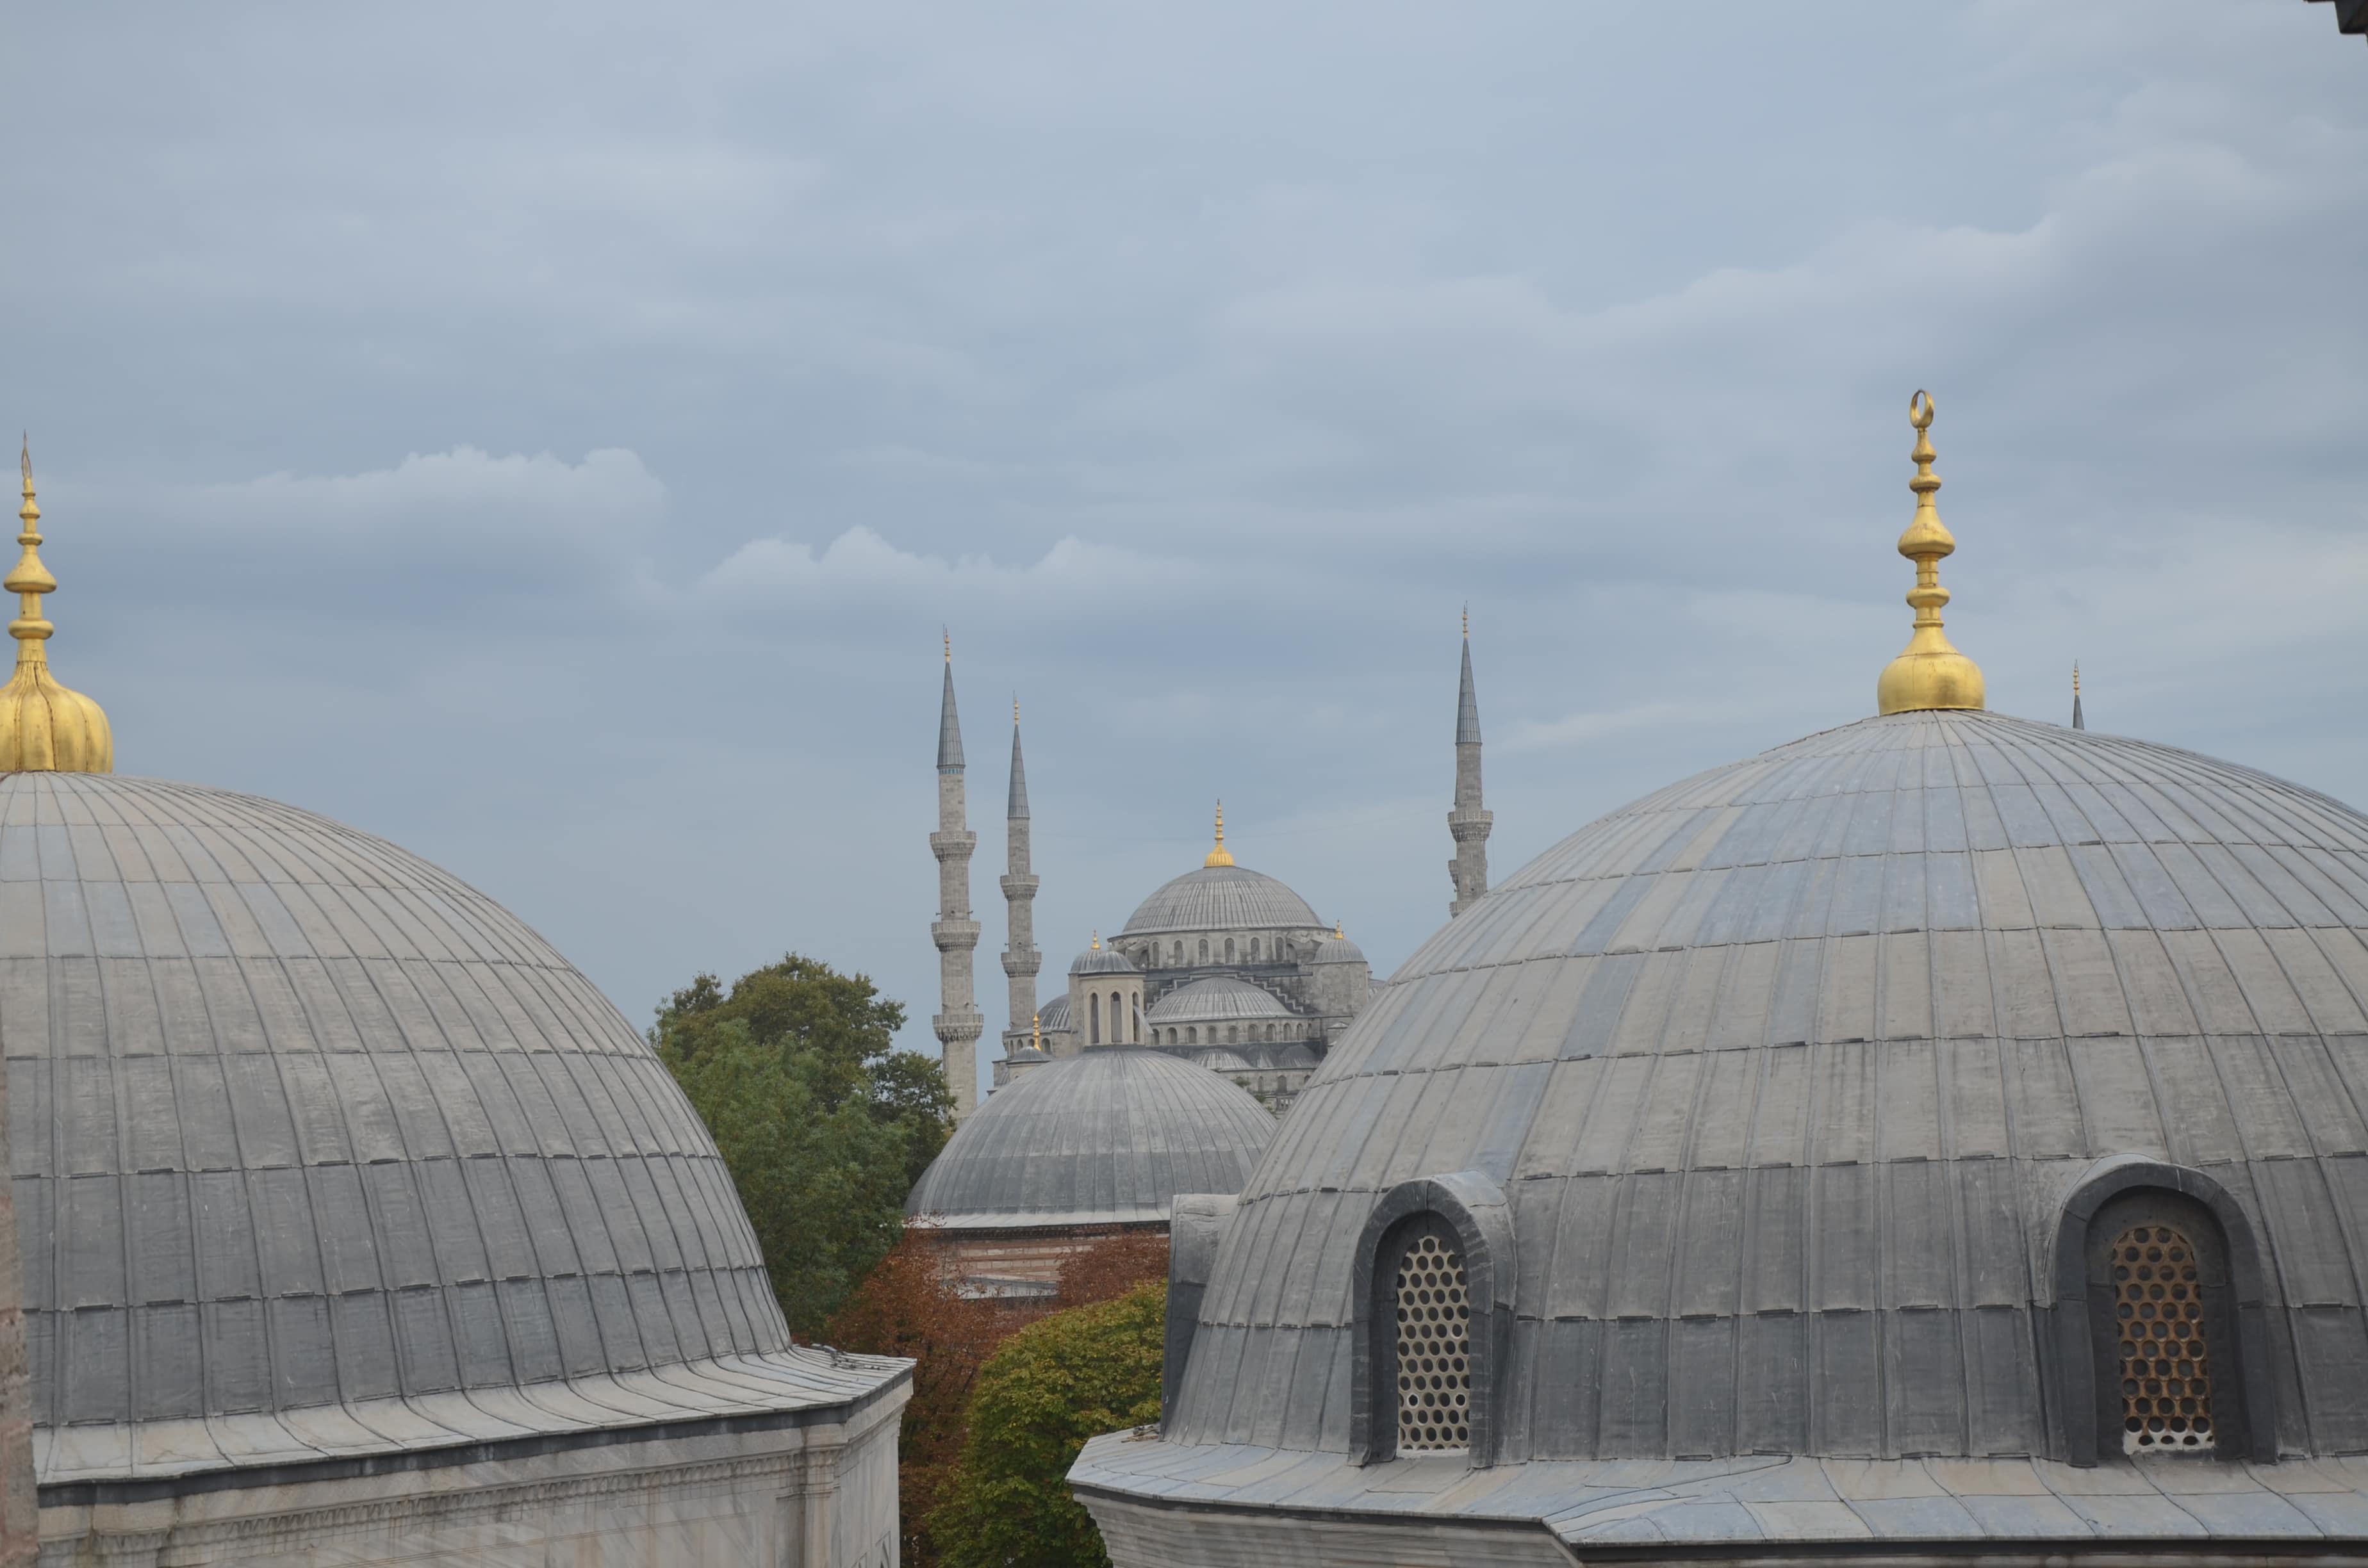 View of the Blue Mosque from Hagia Sophia in Istanbul, Turkey